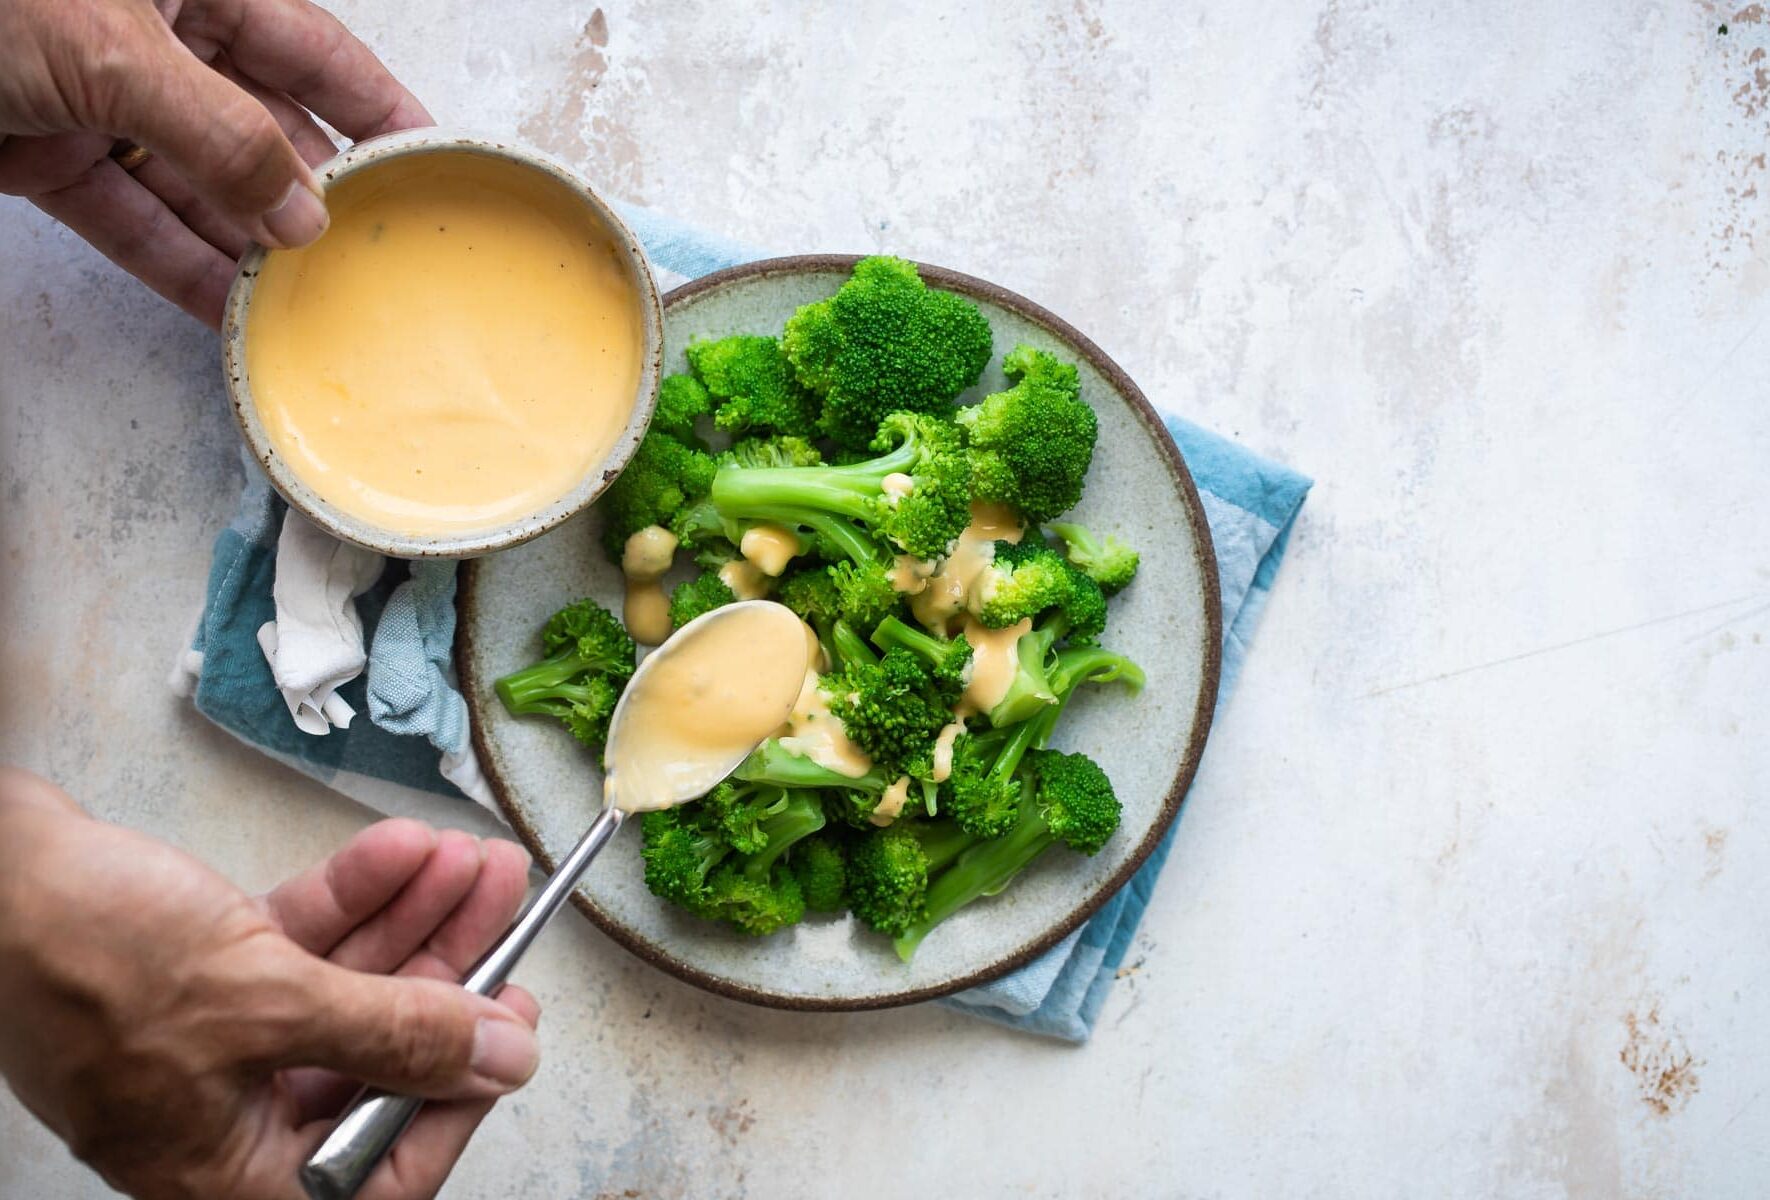 Blanched broccoli on a plate with cheese sauce.